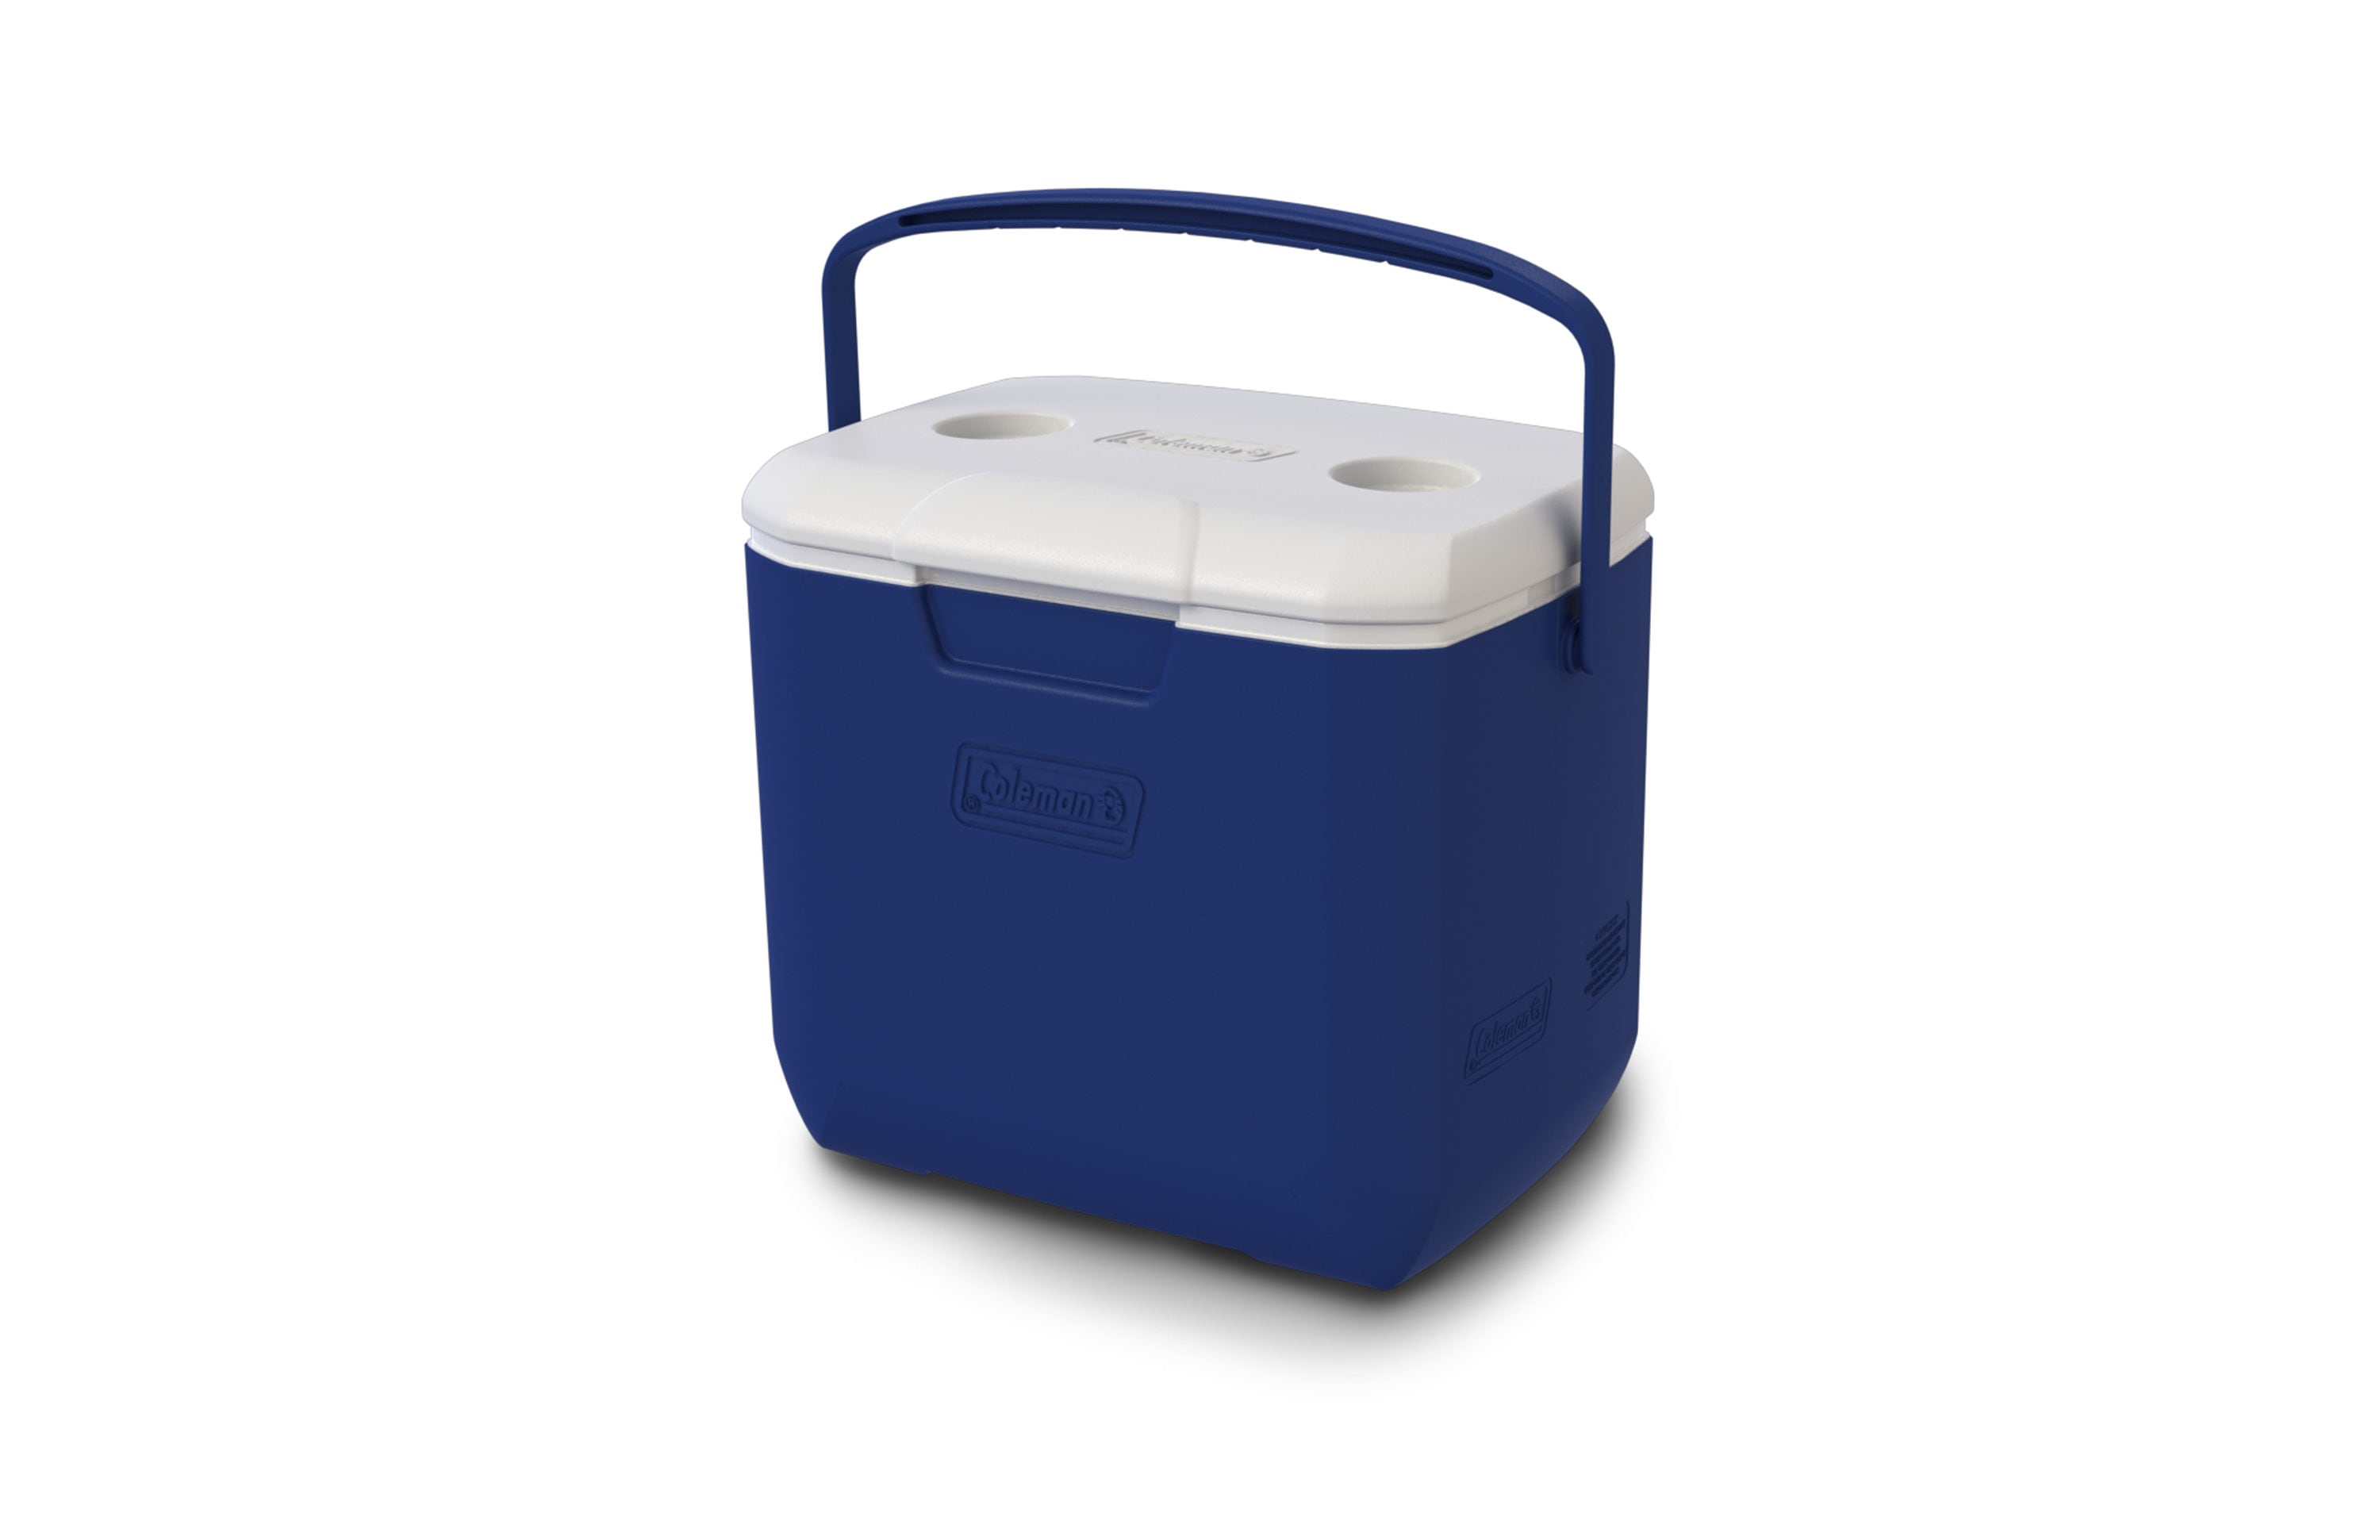 Coleman 30-Quart Insulated Chest Cooler at Lowes.com